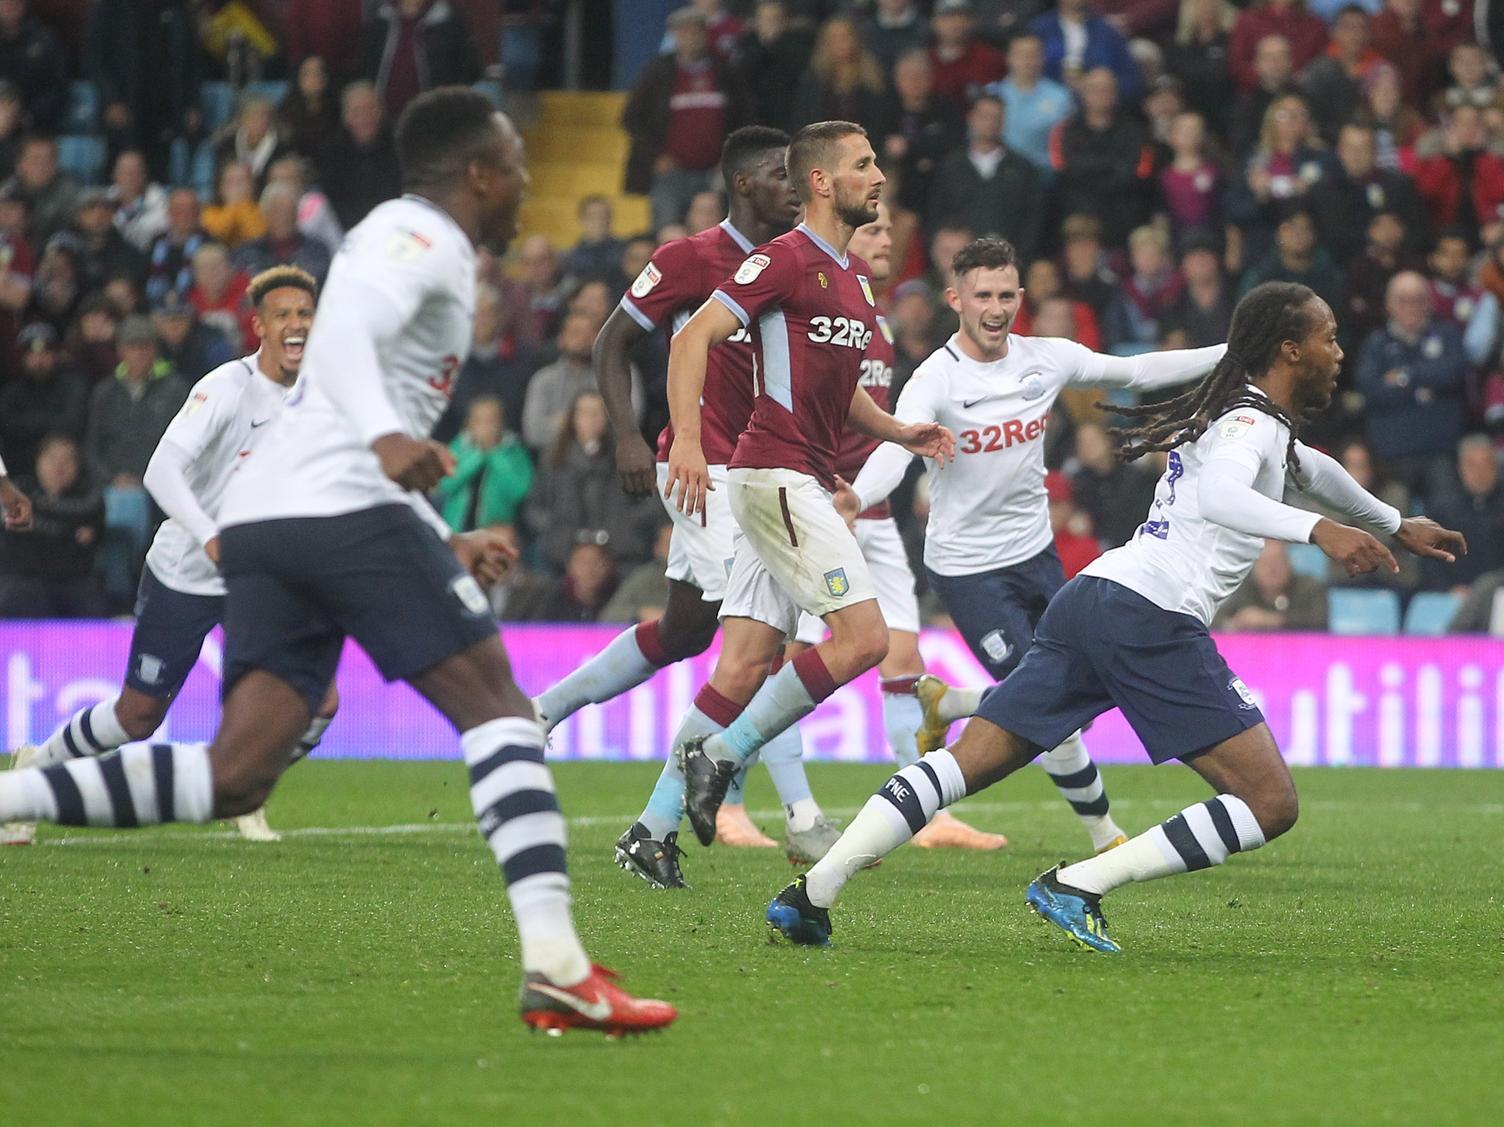 Daniel Johnson's penalty started PNE's comeback in the 3-3 draw with Aston Villa at Villa Park in October 2018